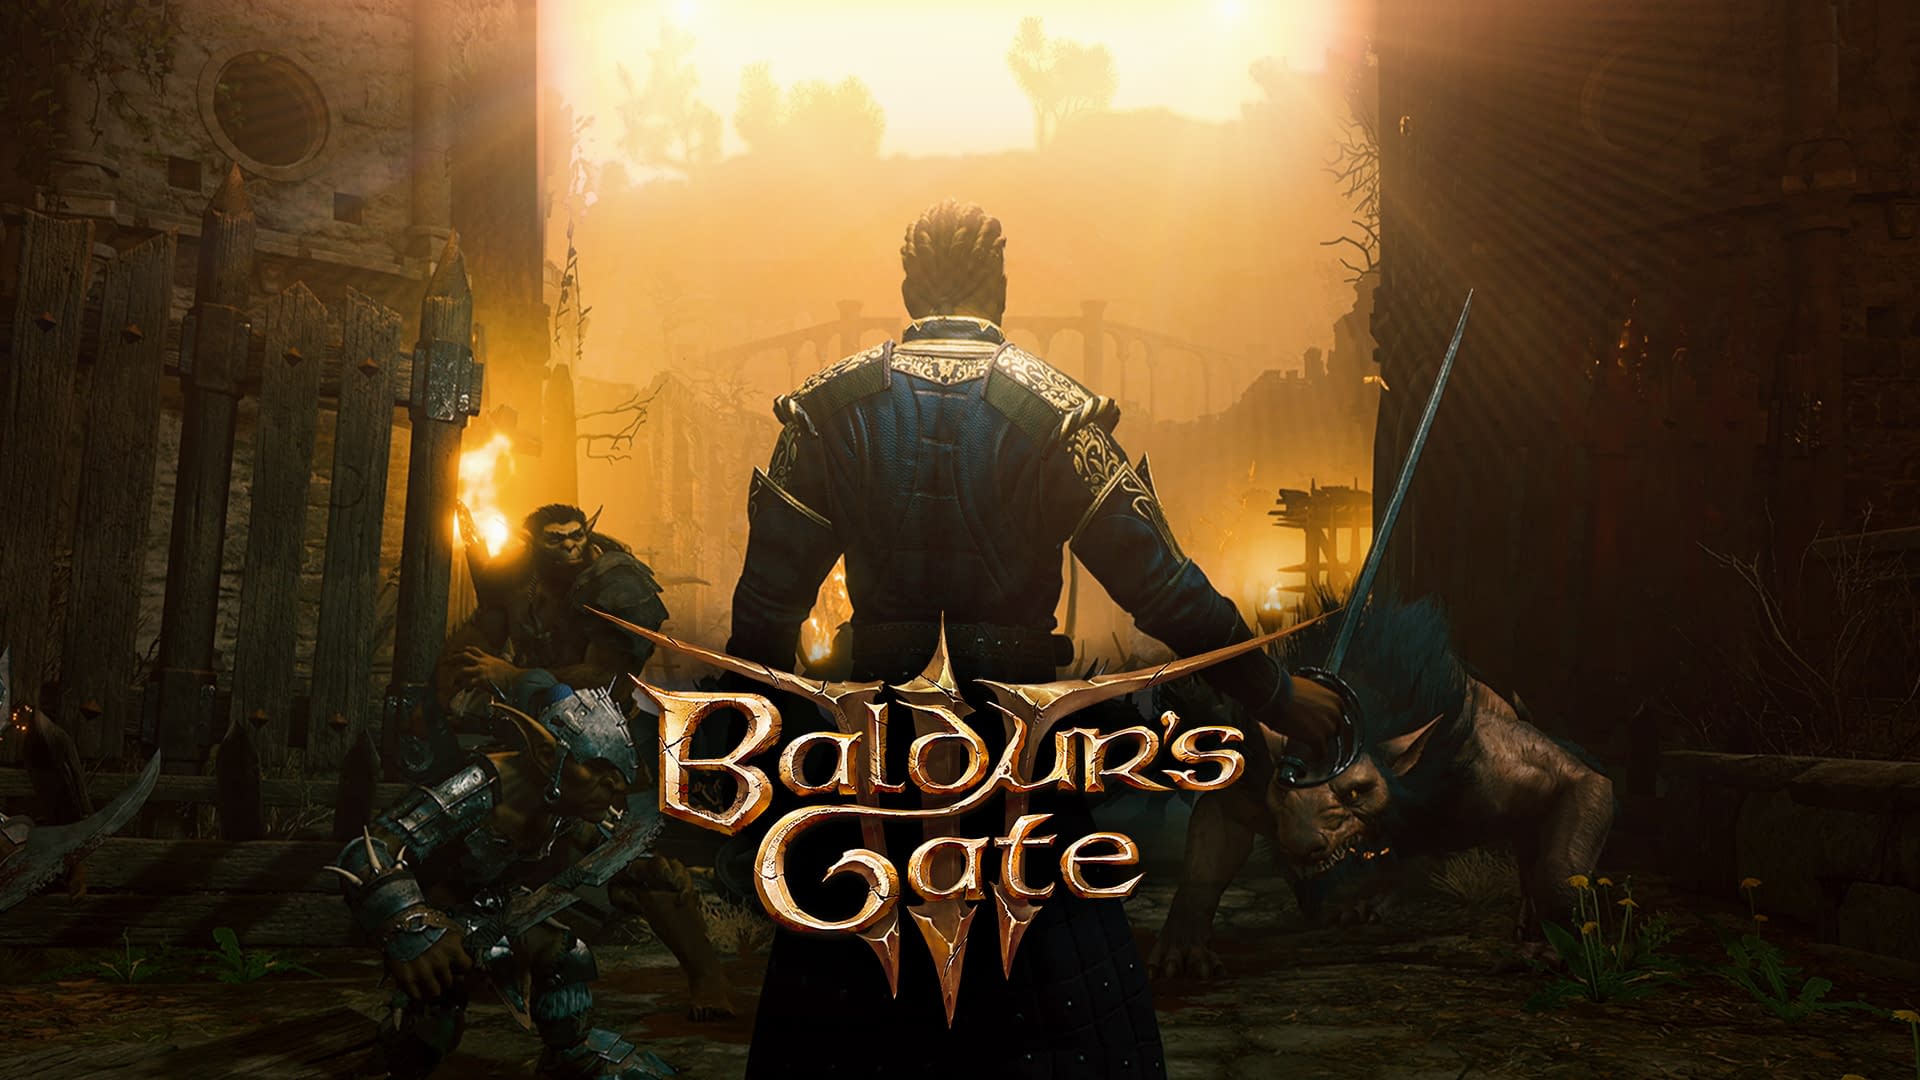 Thoughts on these titles? : r/baldursgate